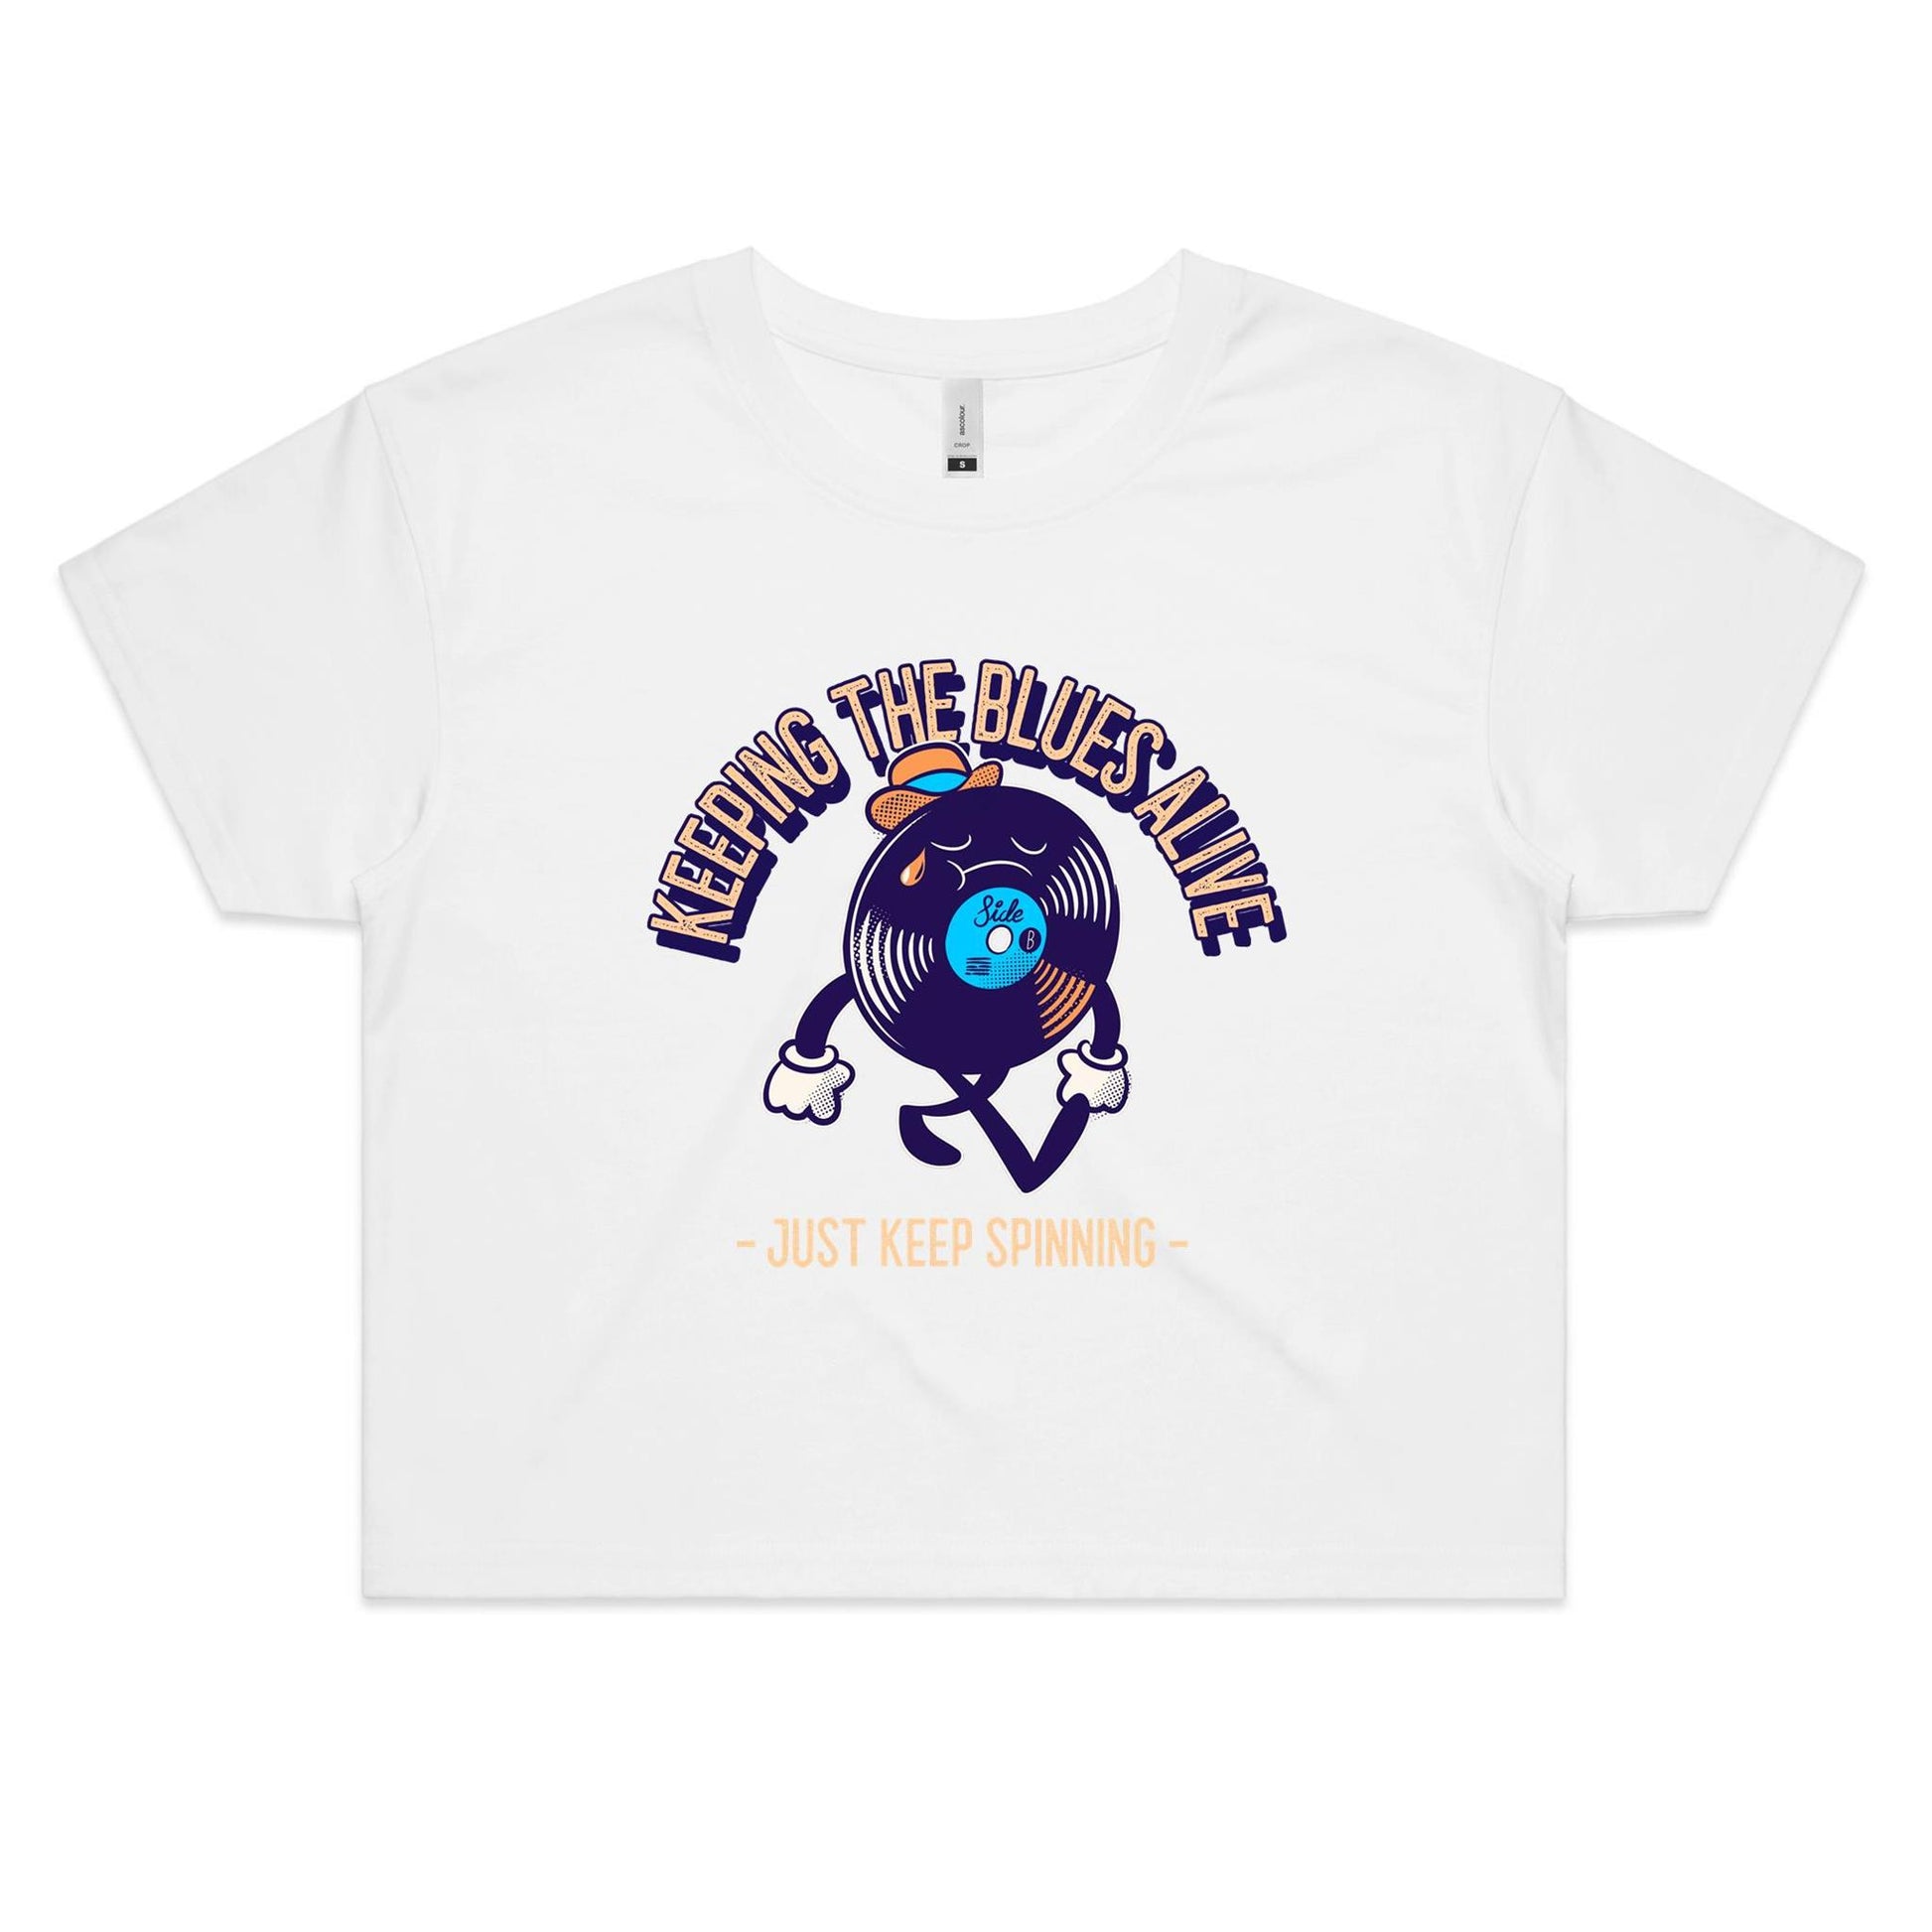 Keeping The Blues Alive - Women's Crop Tee White Womens Crop Top Music